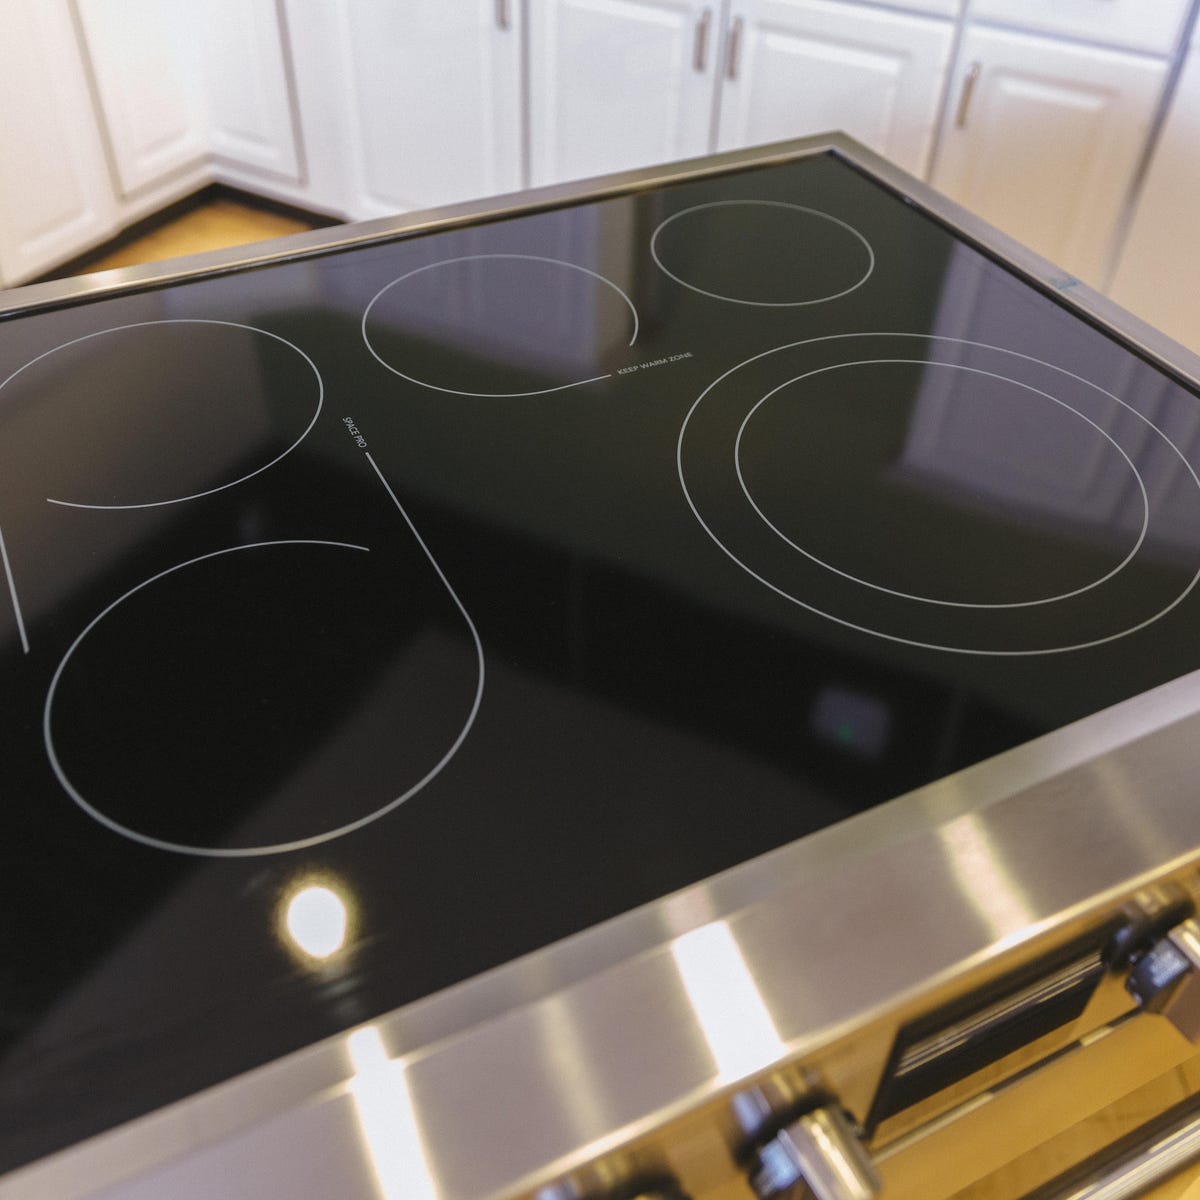 How to Clean a Glass Stovetop Without Scratching It